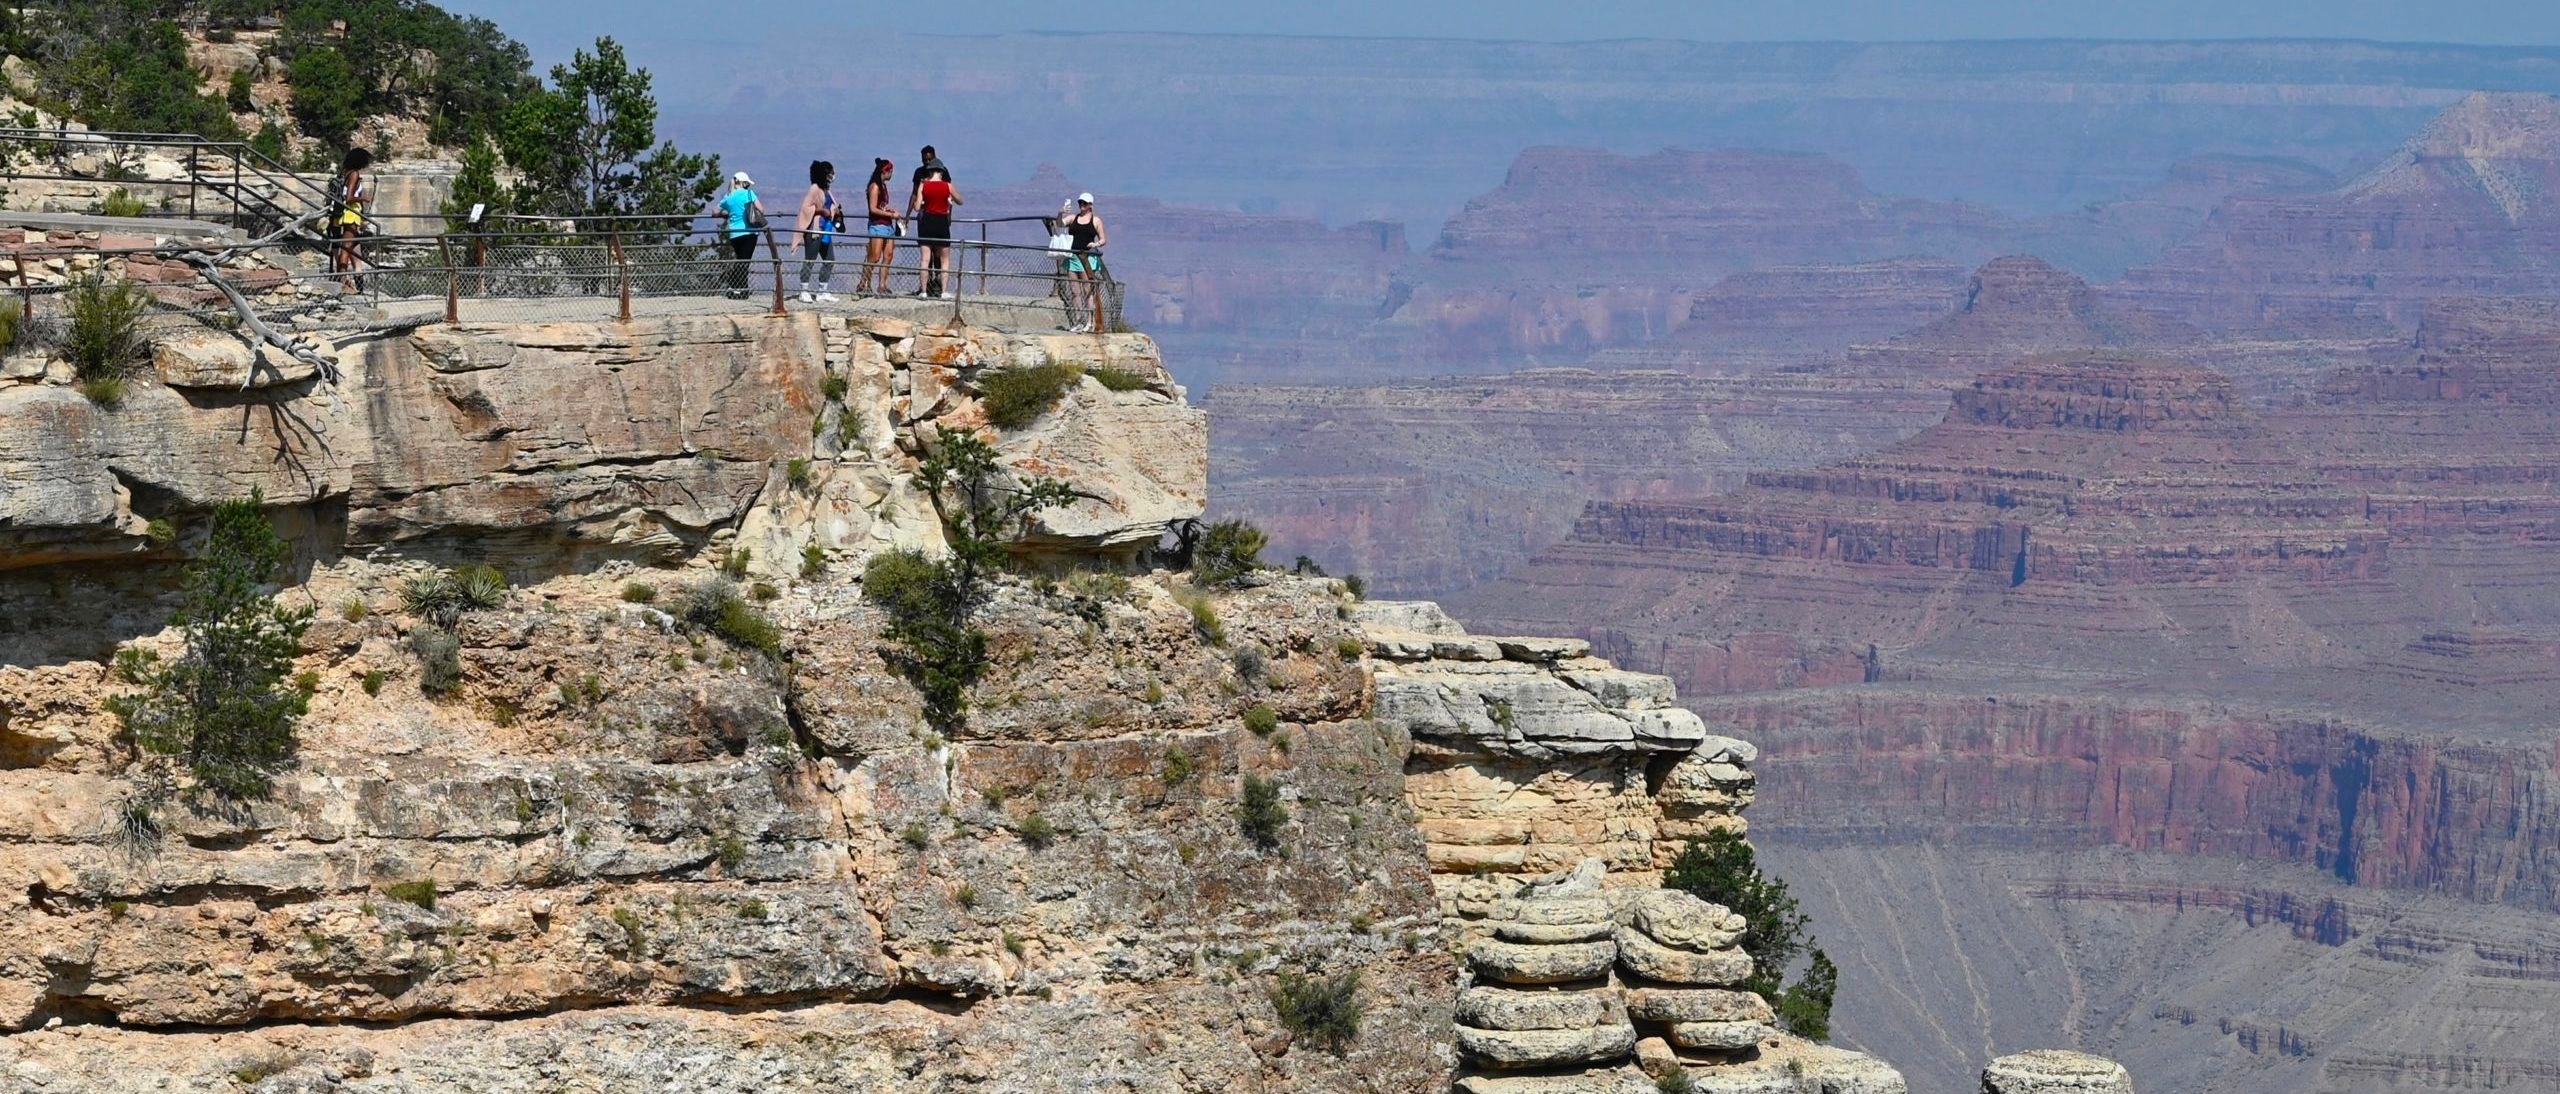 Woman Dies In Flash Flood At Grand Canyon The Daily Caller